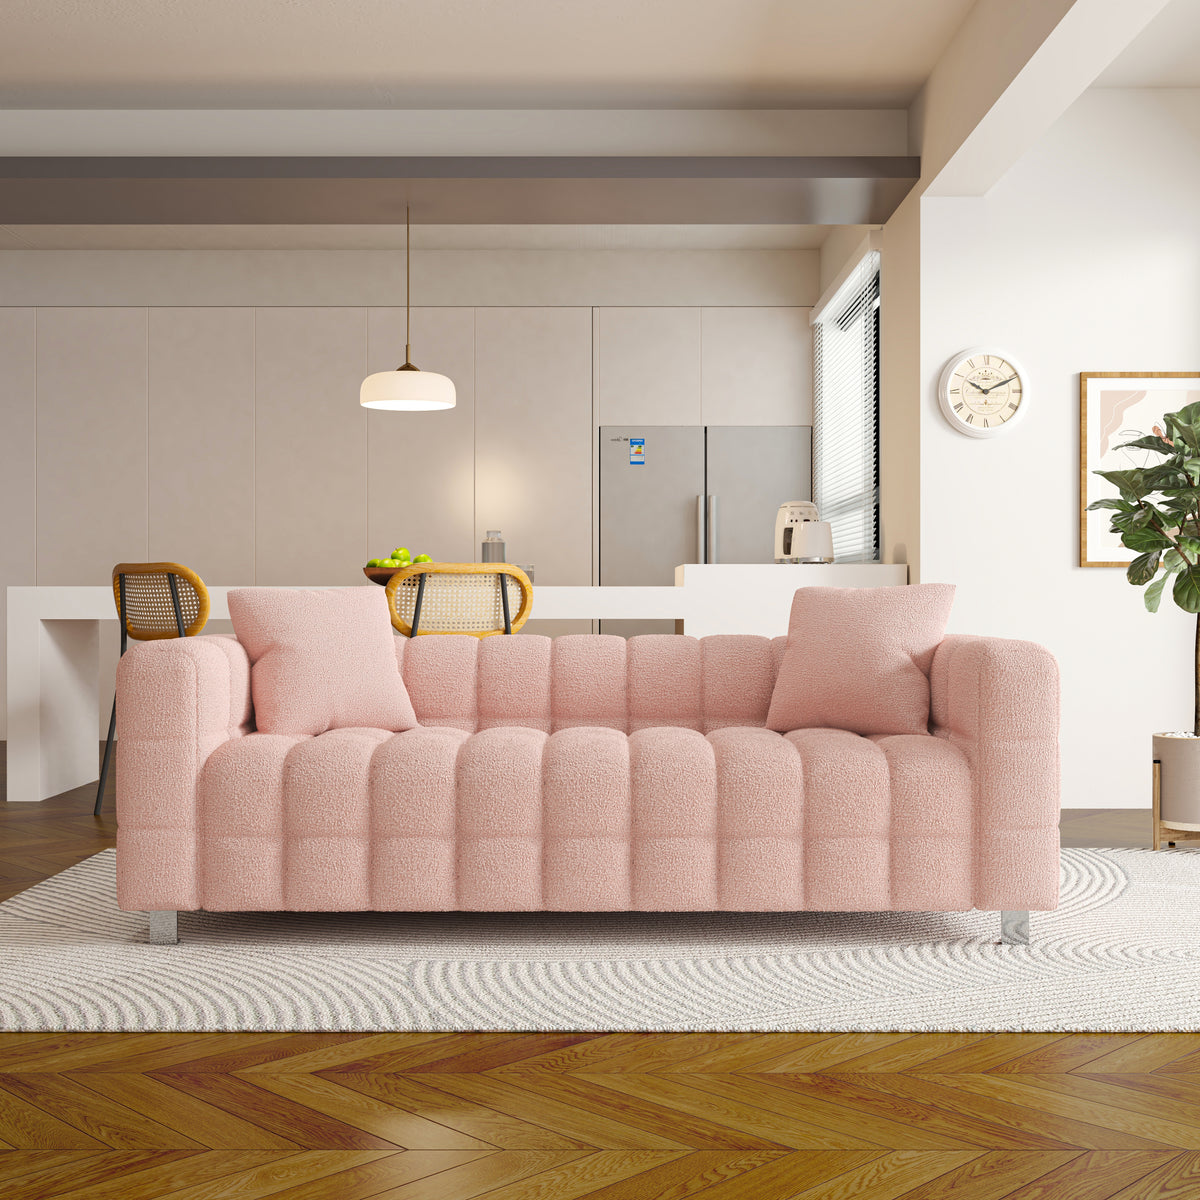 80" Pink Teddy Velvet Sofa with Two Pillows Suitable